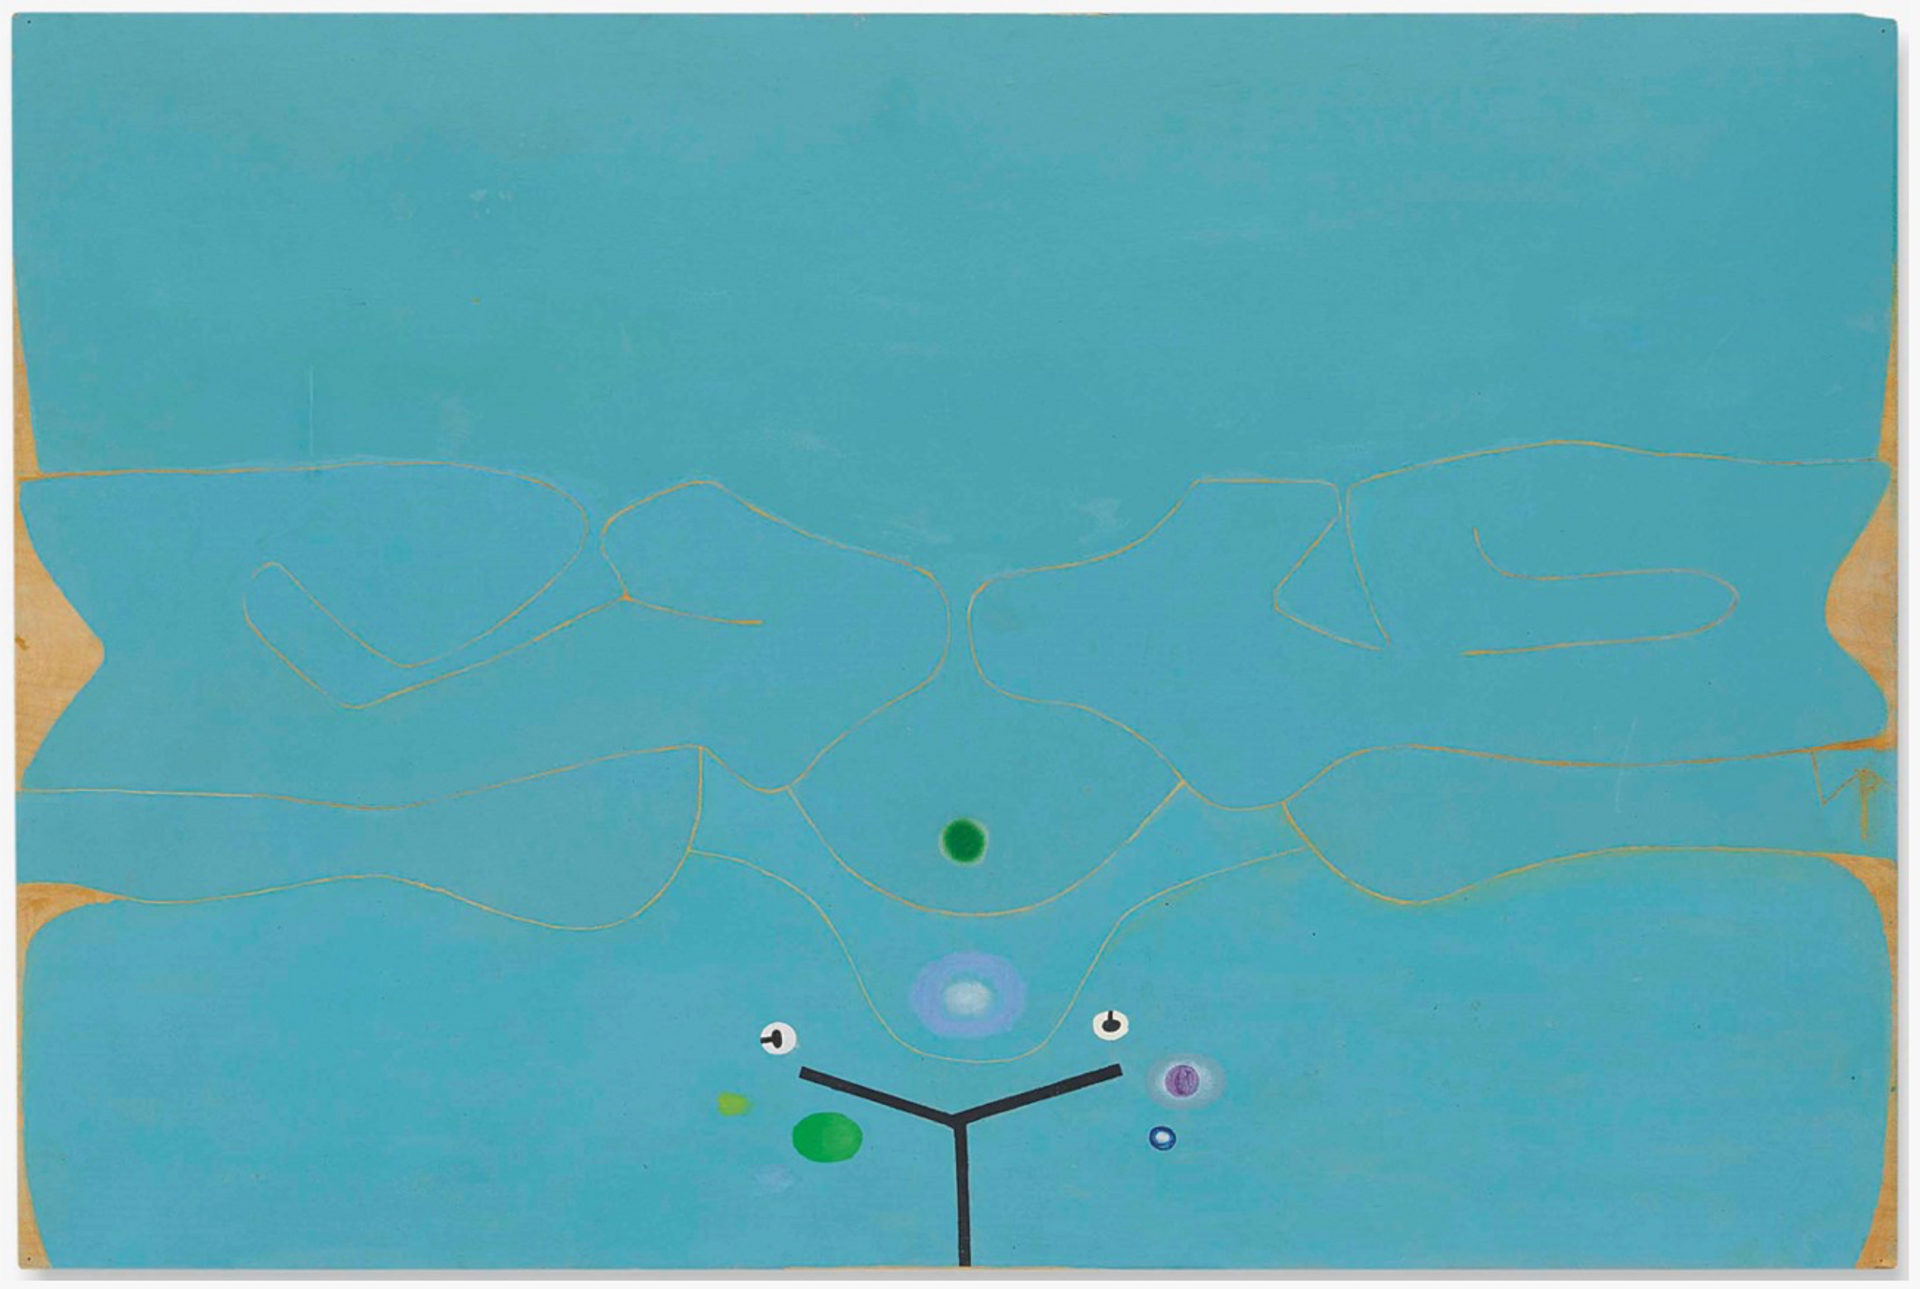 Abstract painting with blue background, unpainted edges, and black “Y-formation’’ with white circles resembling eyes. Various small dots in green and purple hues.